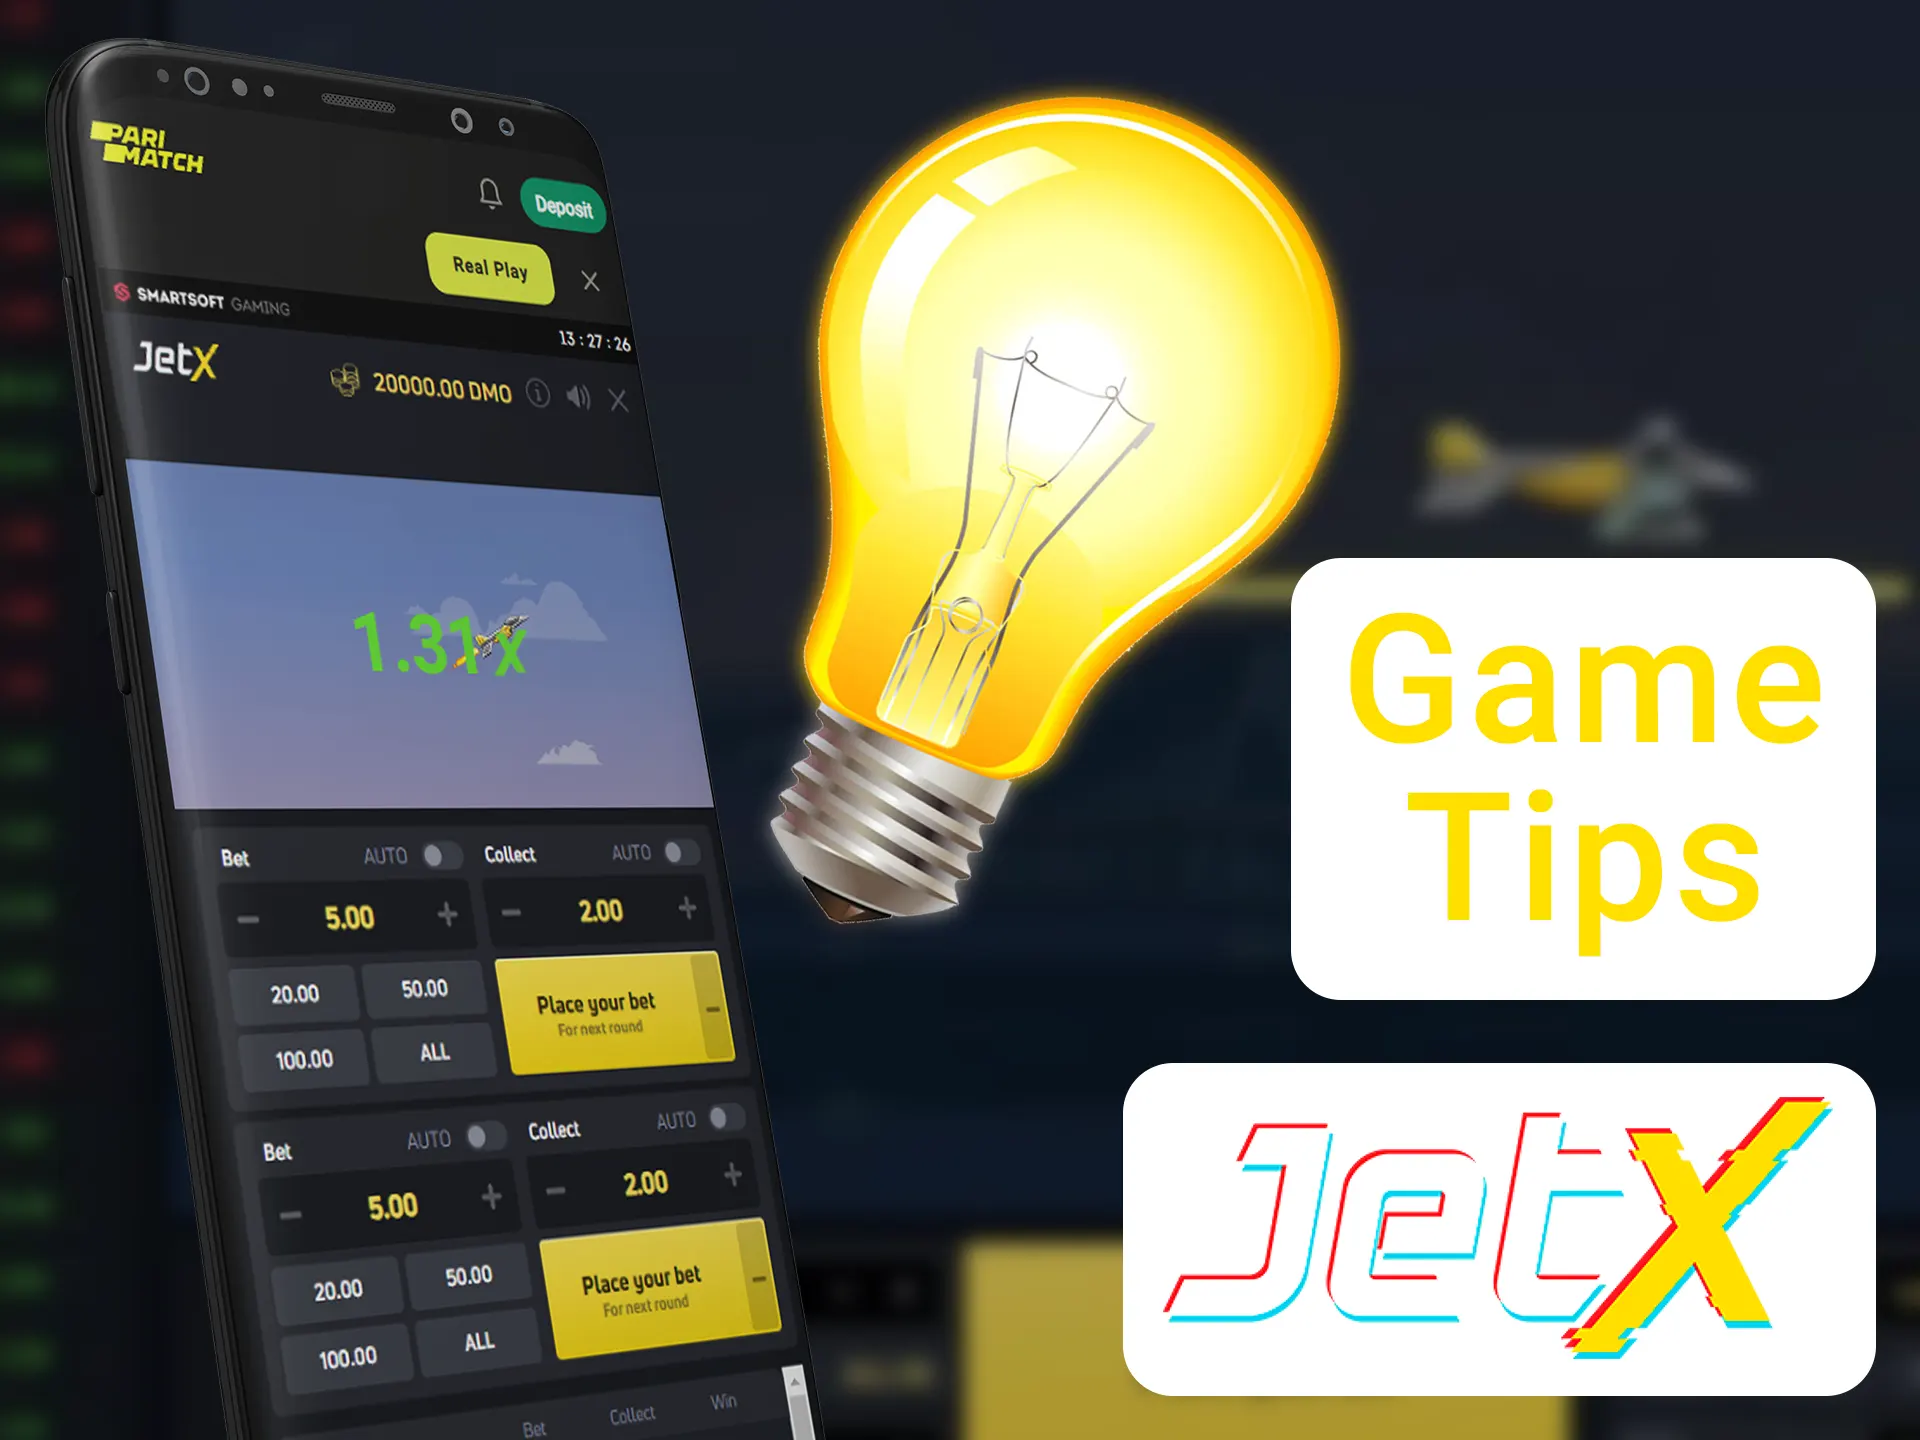 Try following our JetX gaming tips for winning money.